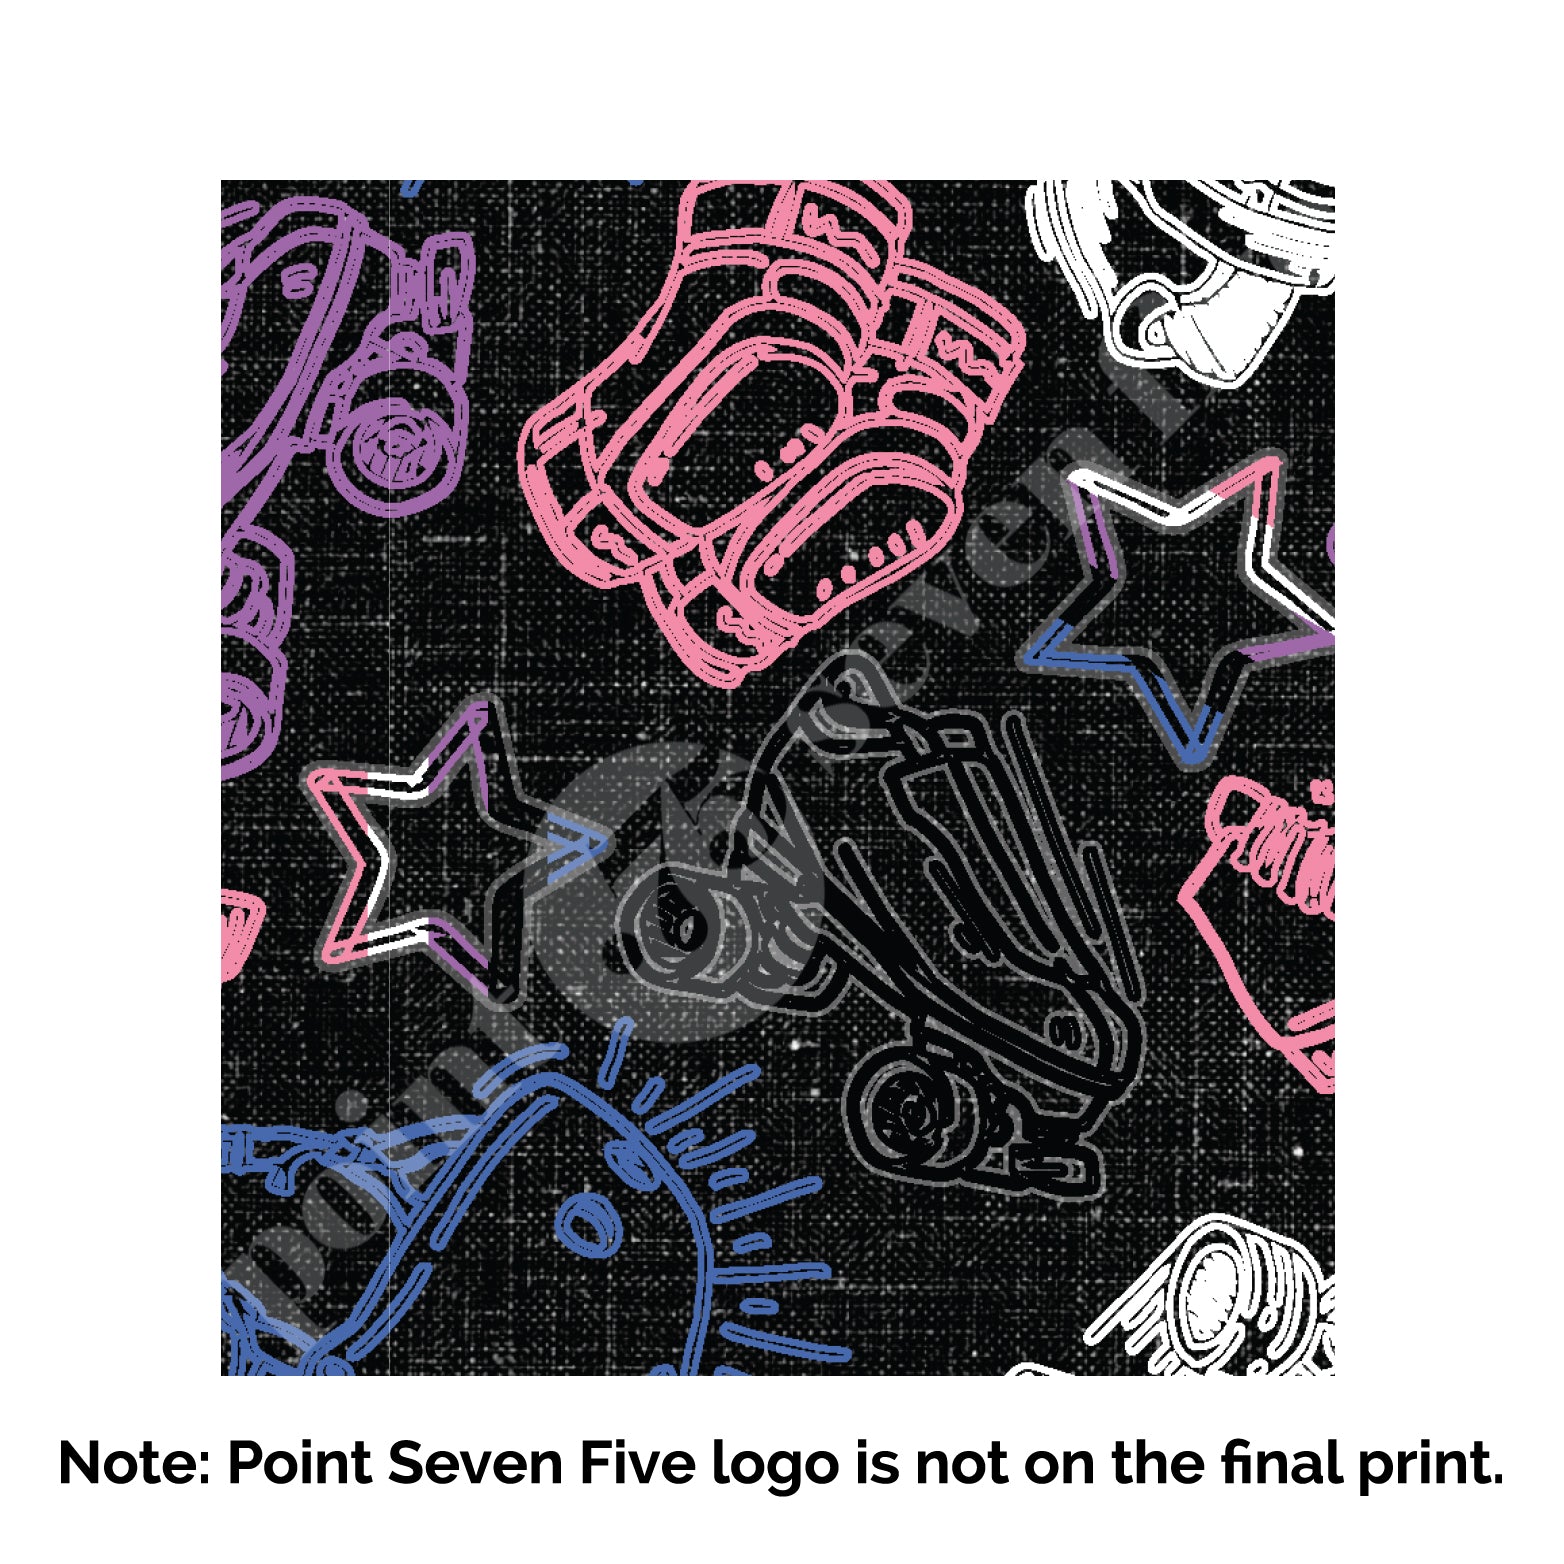 A closeup of the Pride Skate print, caption at the bottom reads "Note: Point Seven Five logo is not onthe final print." The print has rollerskates, helmets, stars & knee pads. The graphics are in the colours of the Gender Fluid Pride Flag colours white, pink, blue and purple.